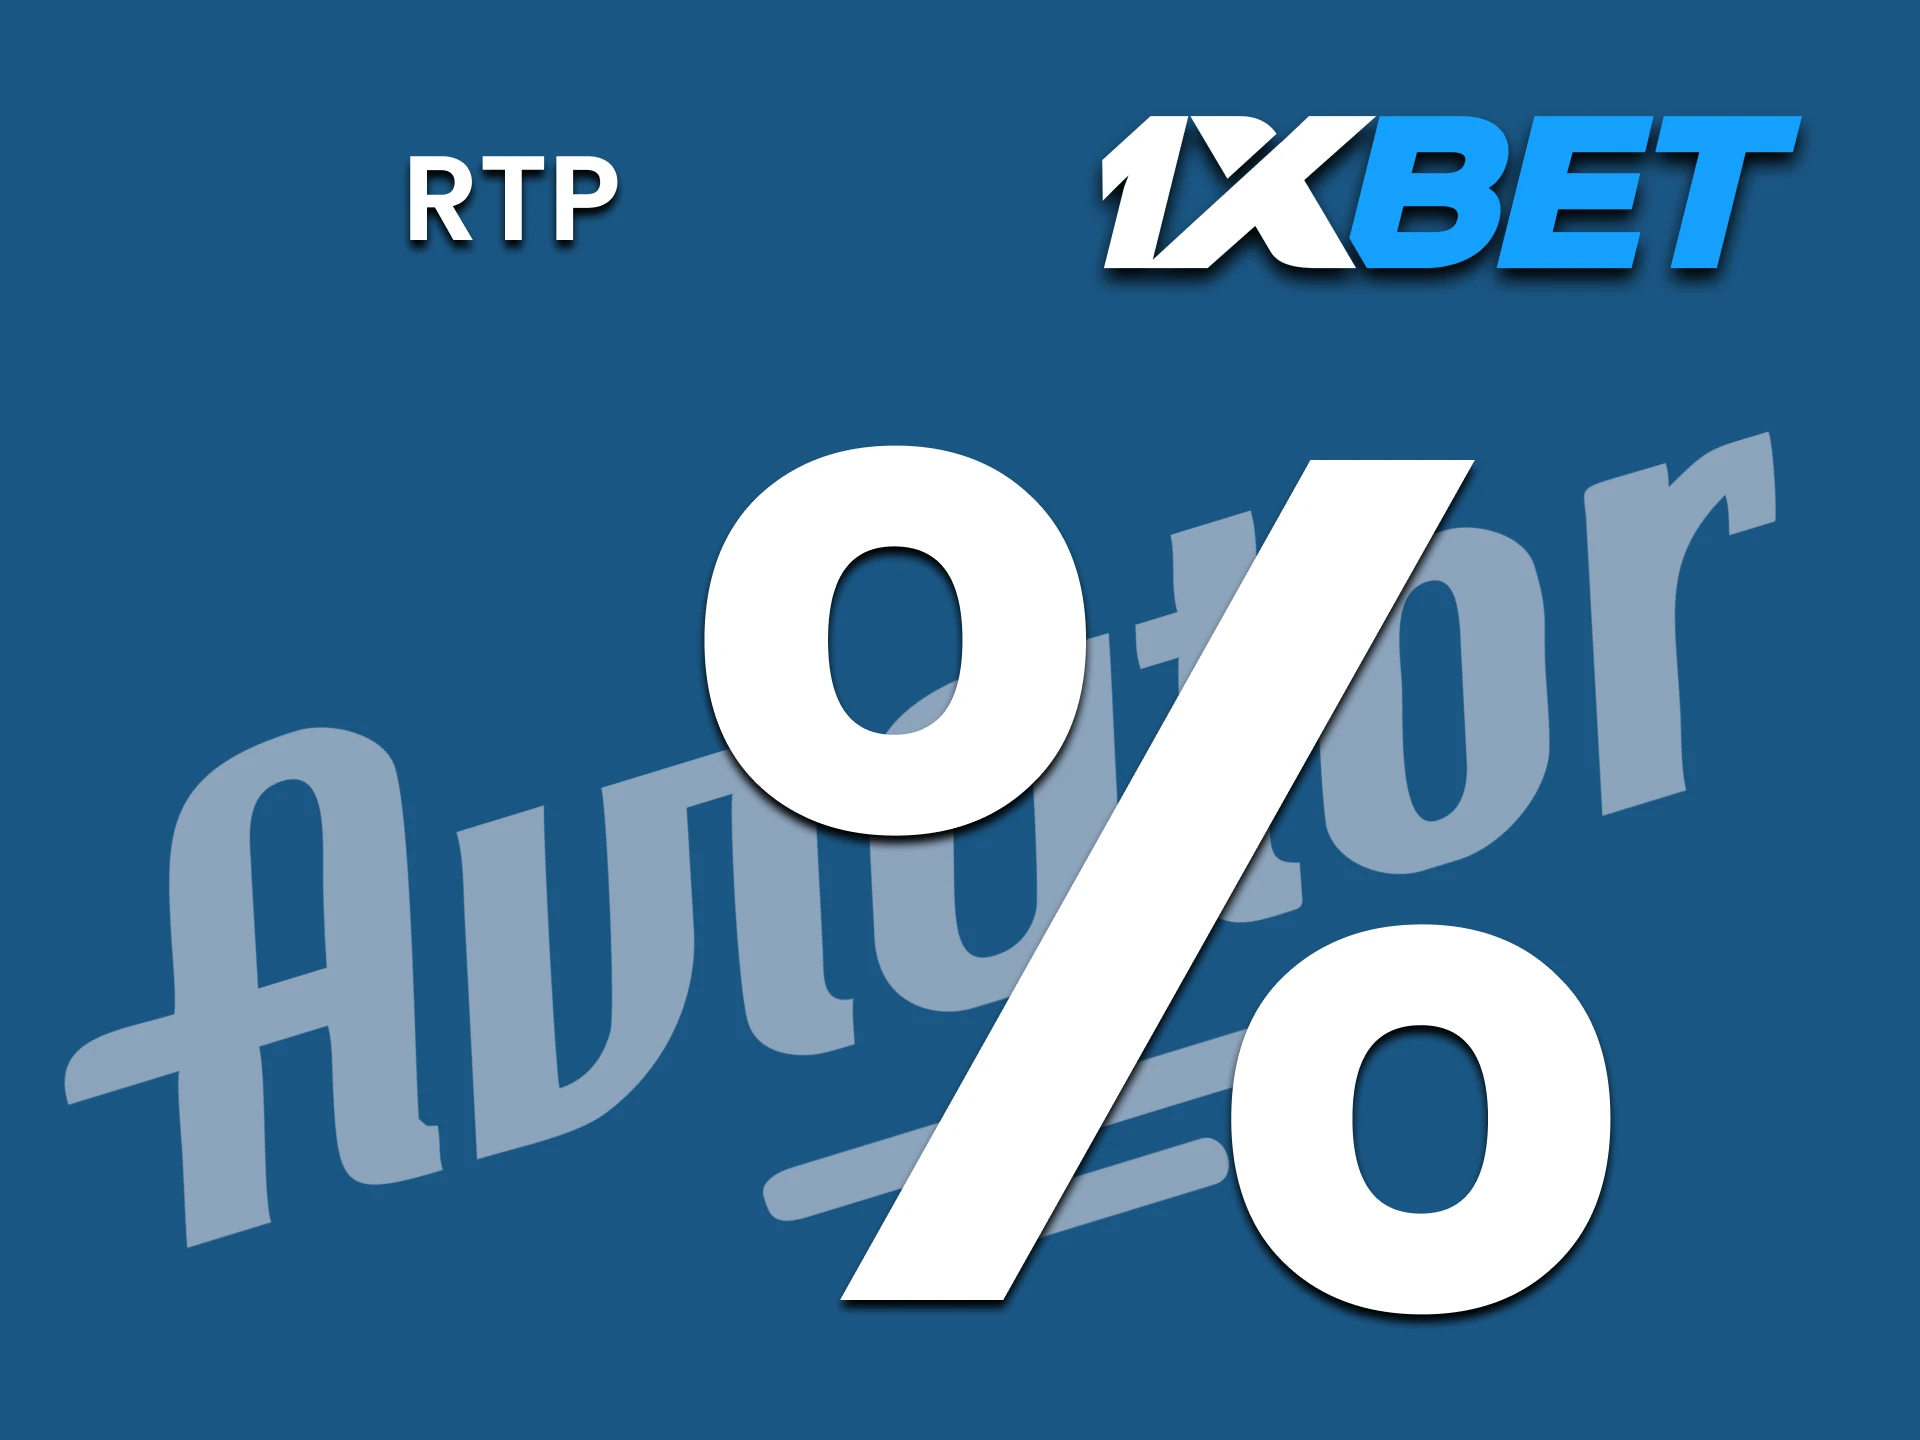 We will tell you what the probability of winning is in the Aviator game on 1xbet.